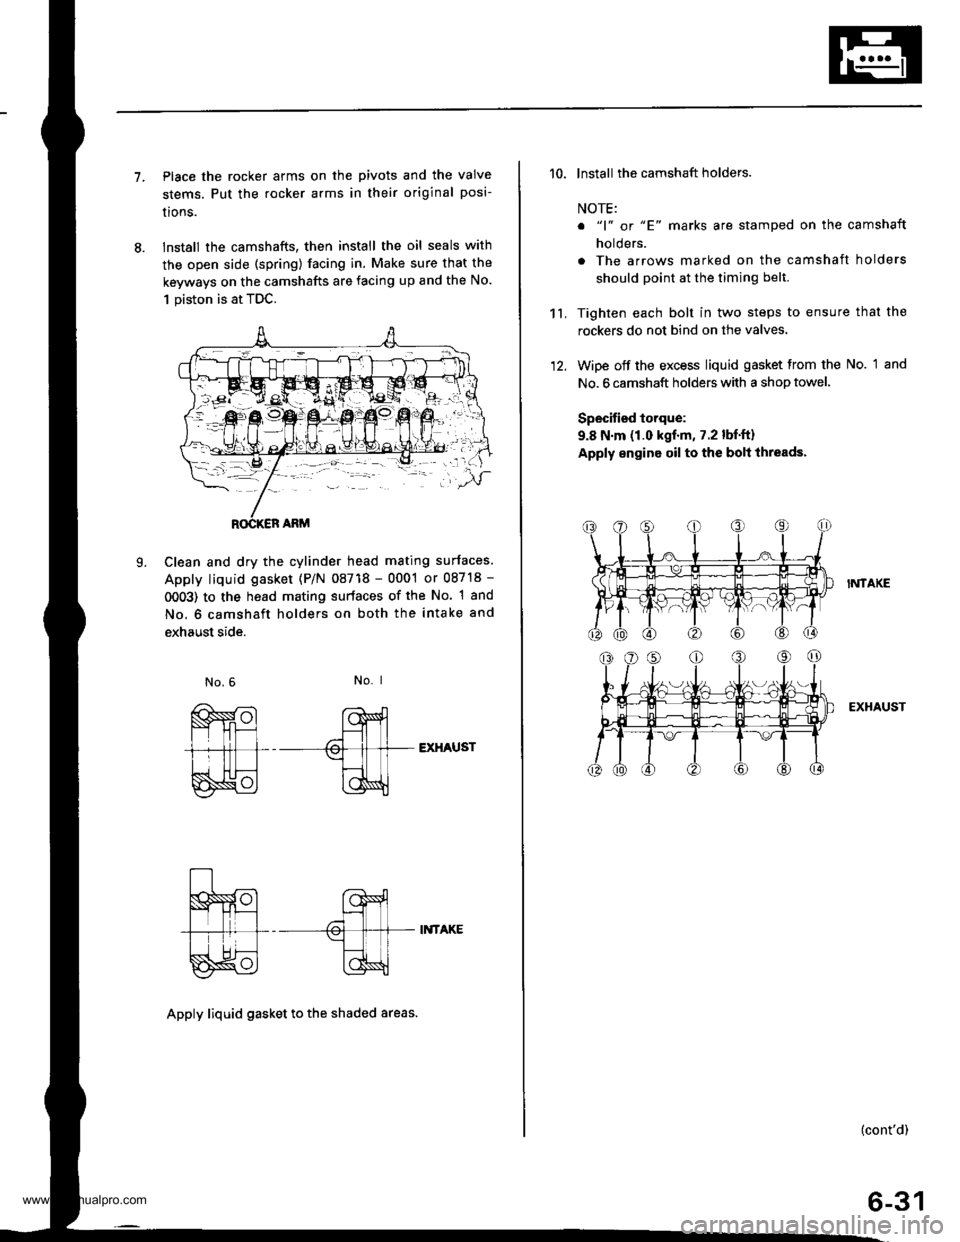 HONDA CR-V 1997 RD1-RD3 / 1.G Workshop Manual 
7.Place the rocker arms on the pivots and the valve
stems. Put the rocker arms in their original posi-
lrons.
lnstall the camshafts, then install the oil seals with
the open side (spring) facing in. 